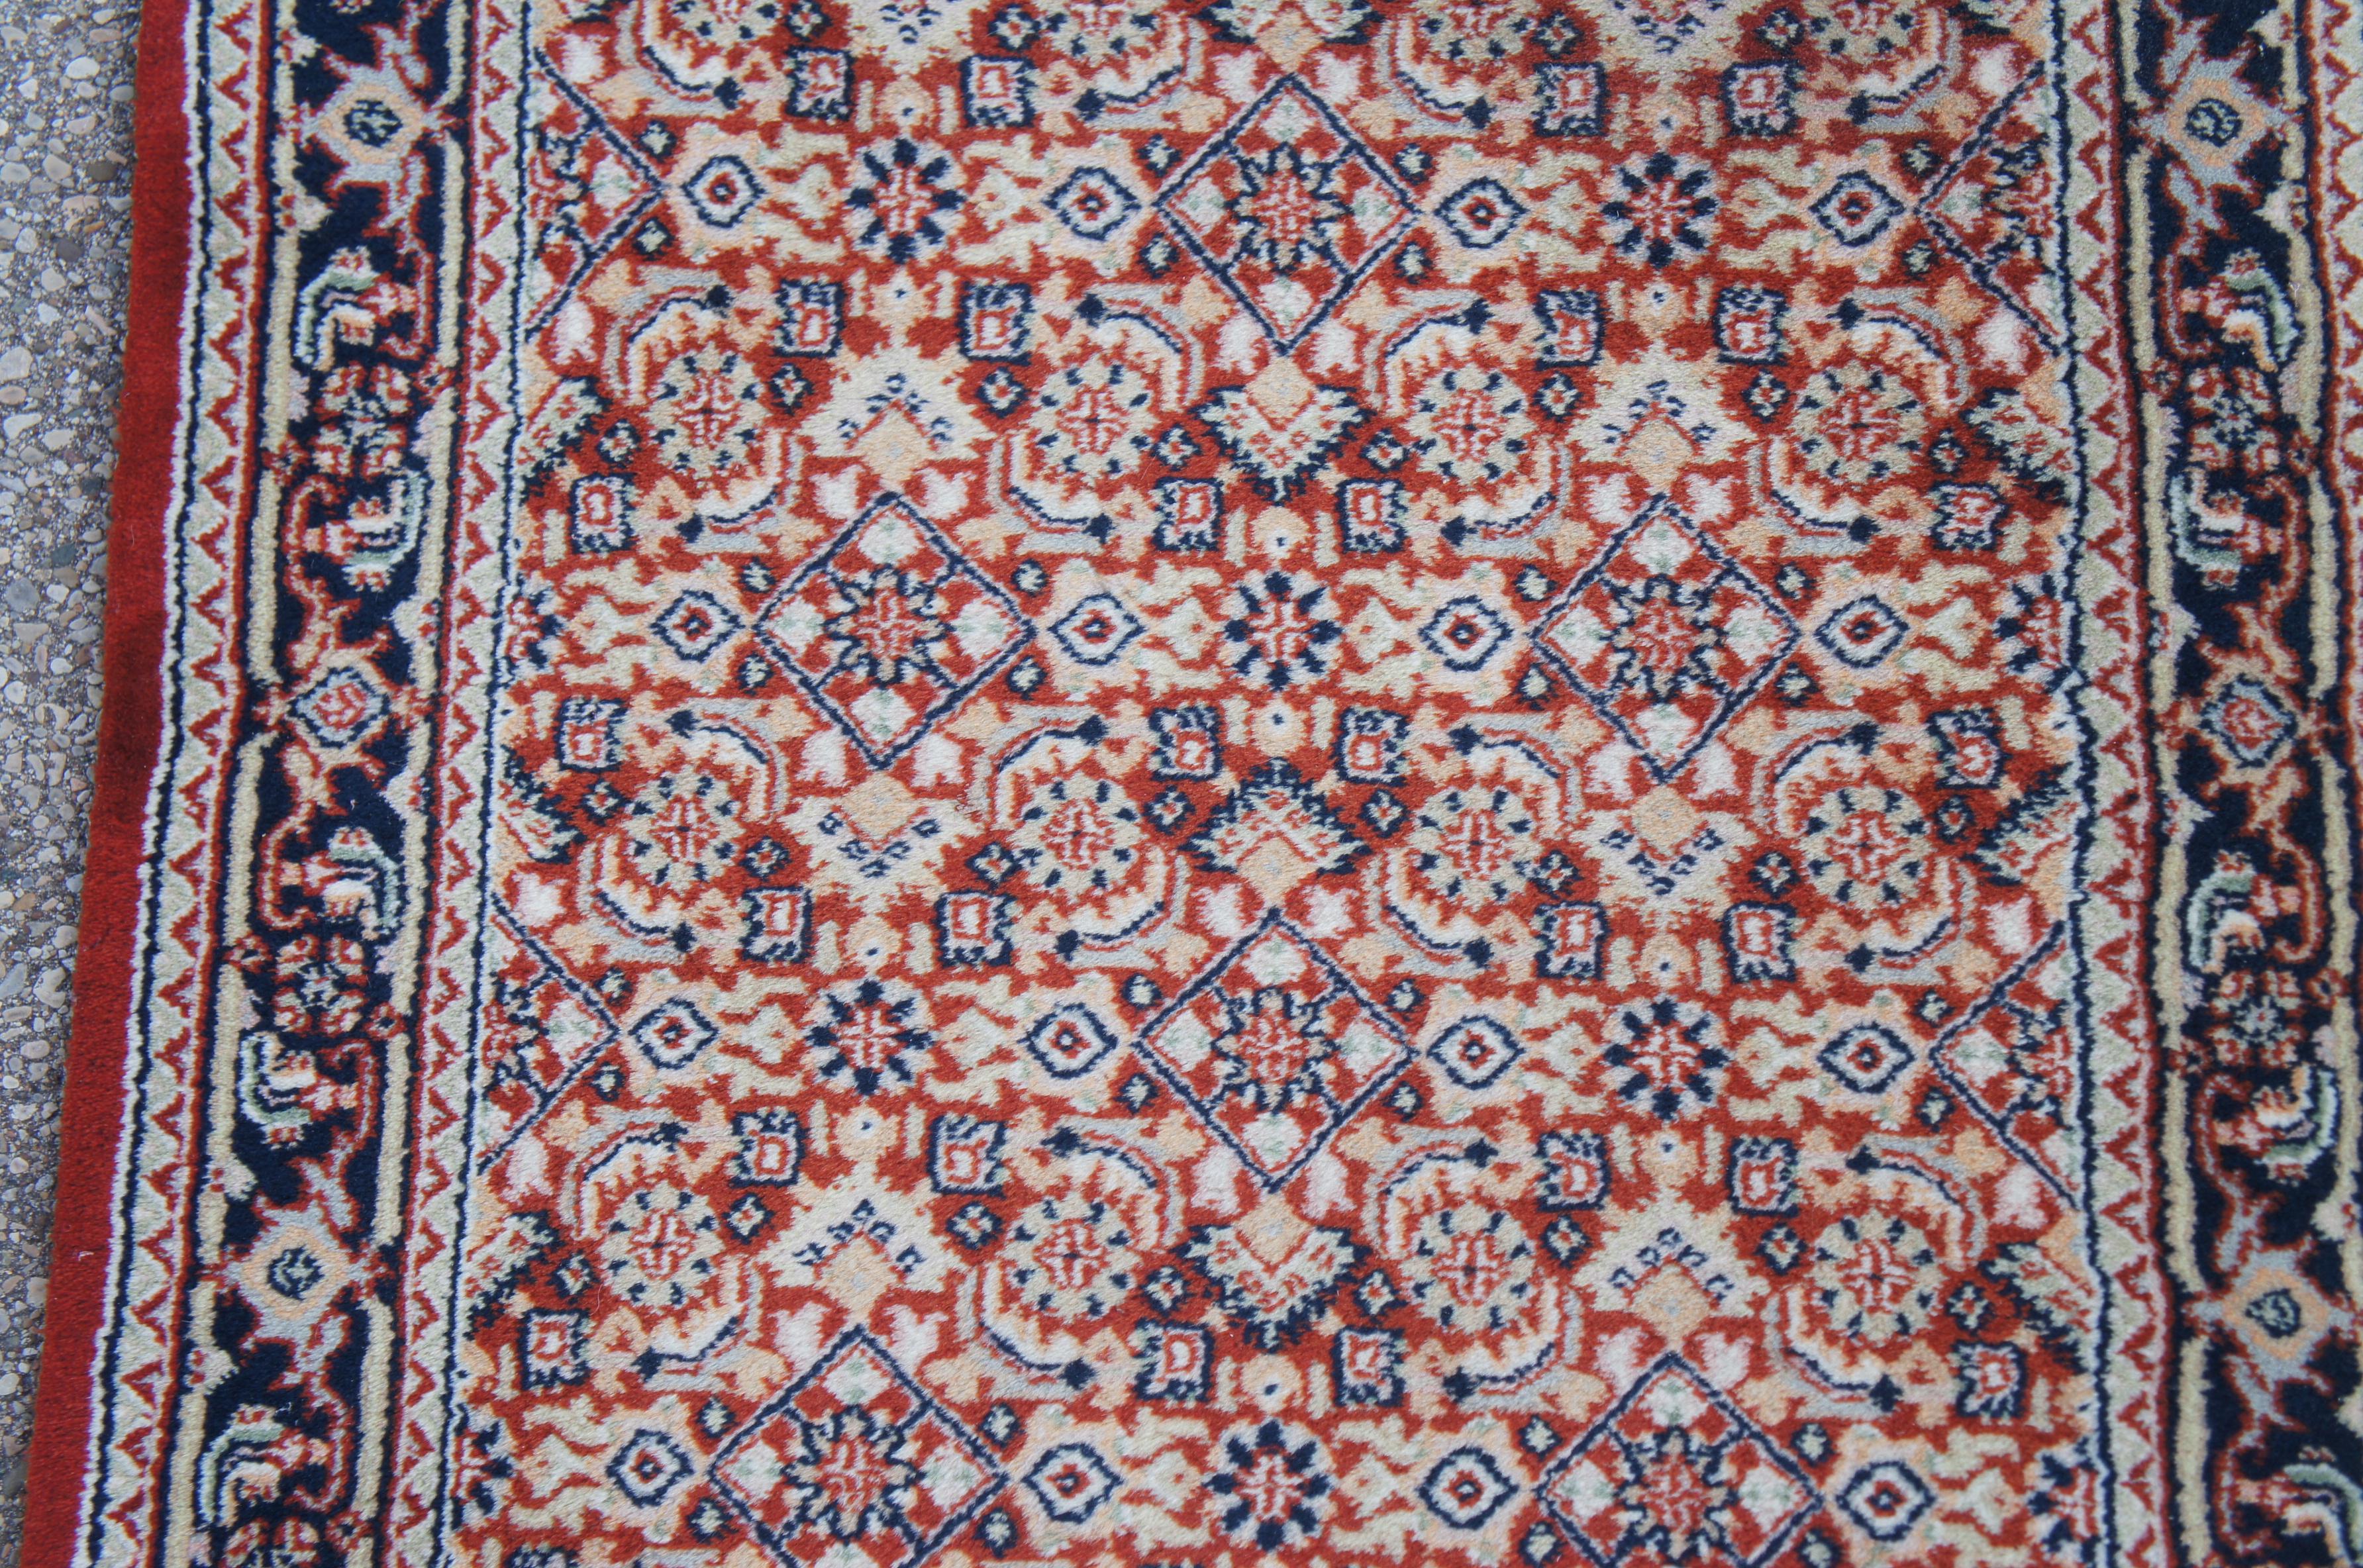 Vintage Indo-Tabriz Hand Knotted Wool Red & Blue Runner Rug 2.5' x 8' For Sale 2